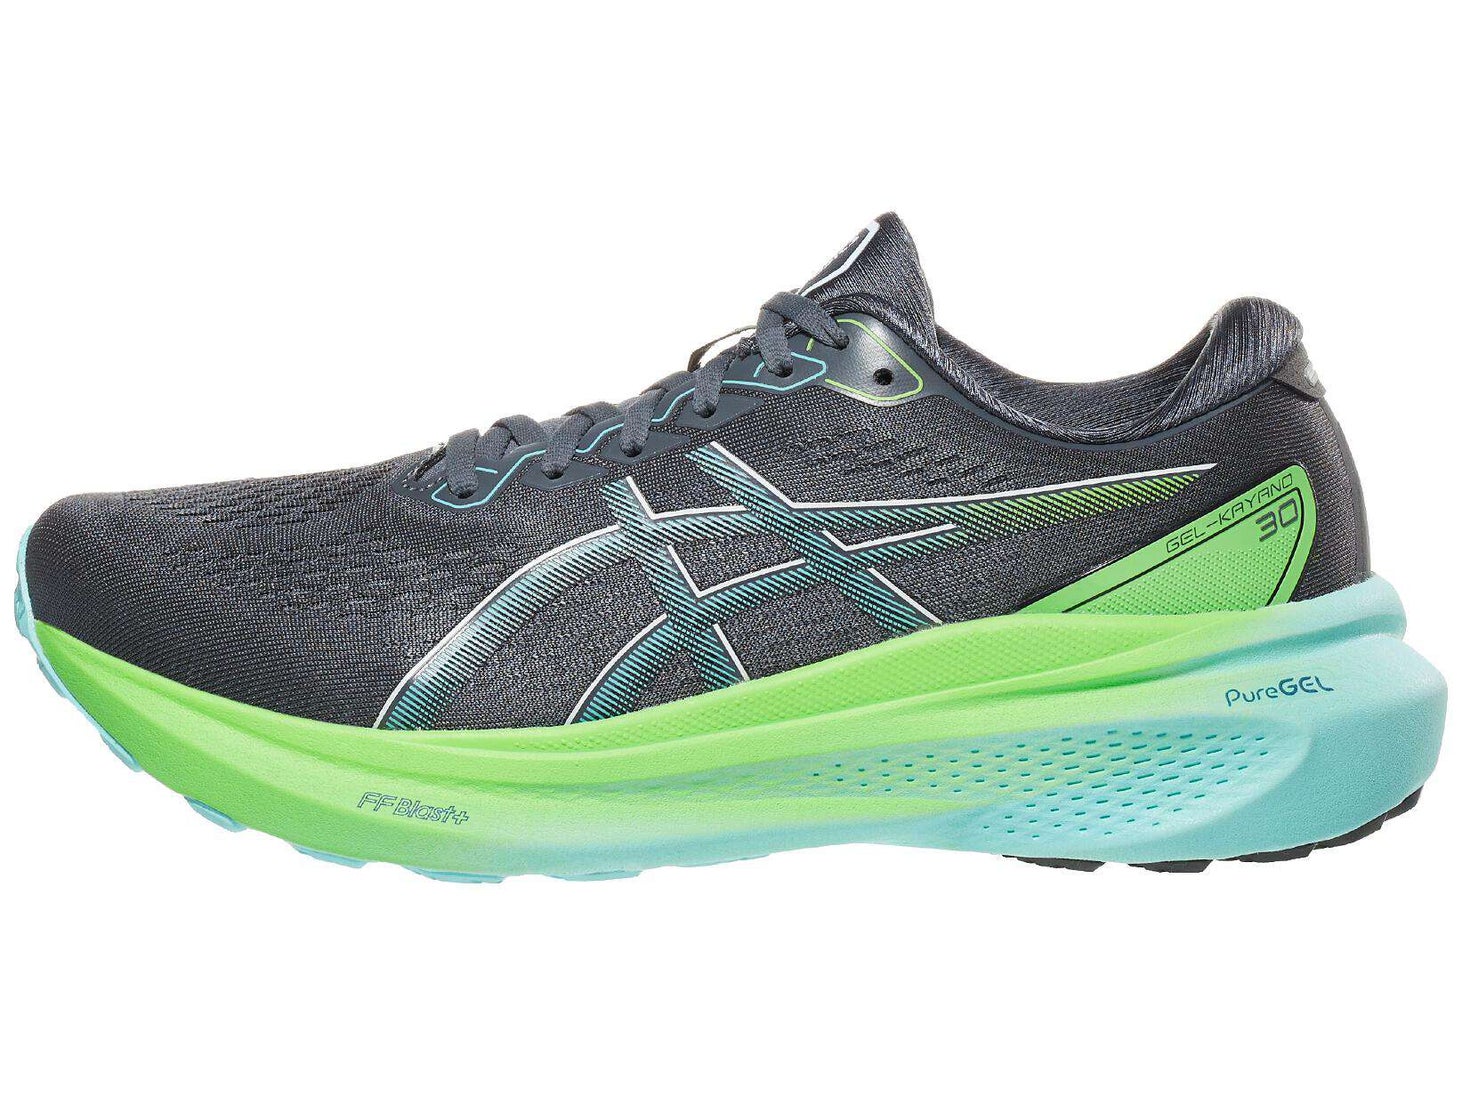 Discover The Best ASICS Running Shoes | Running Warehouse Gear Guide